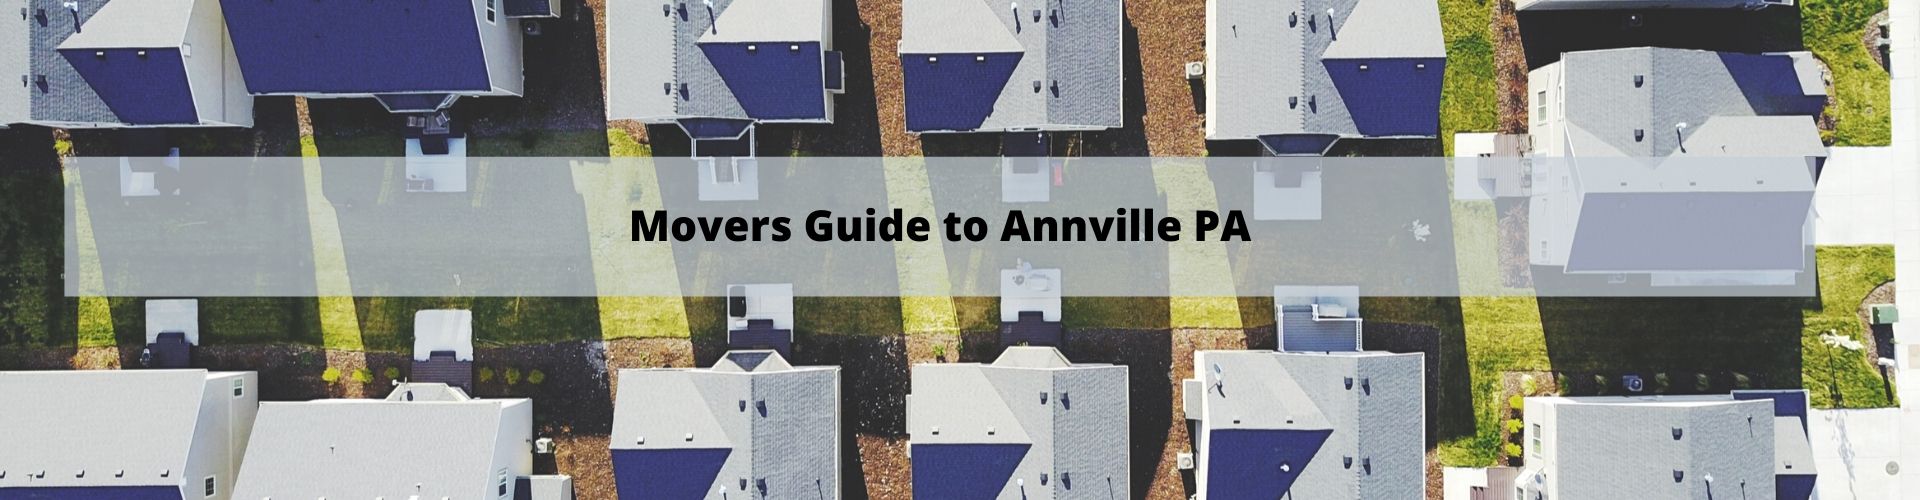 Movers Guide to Annville PA